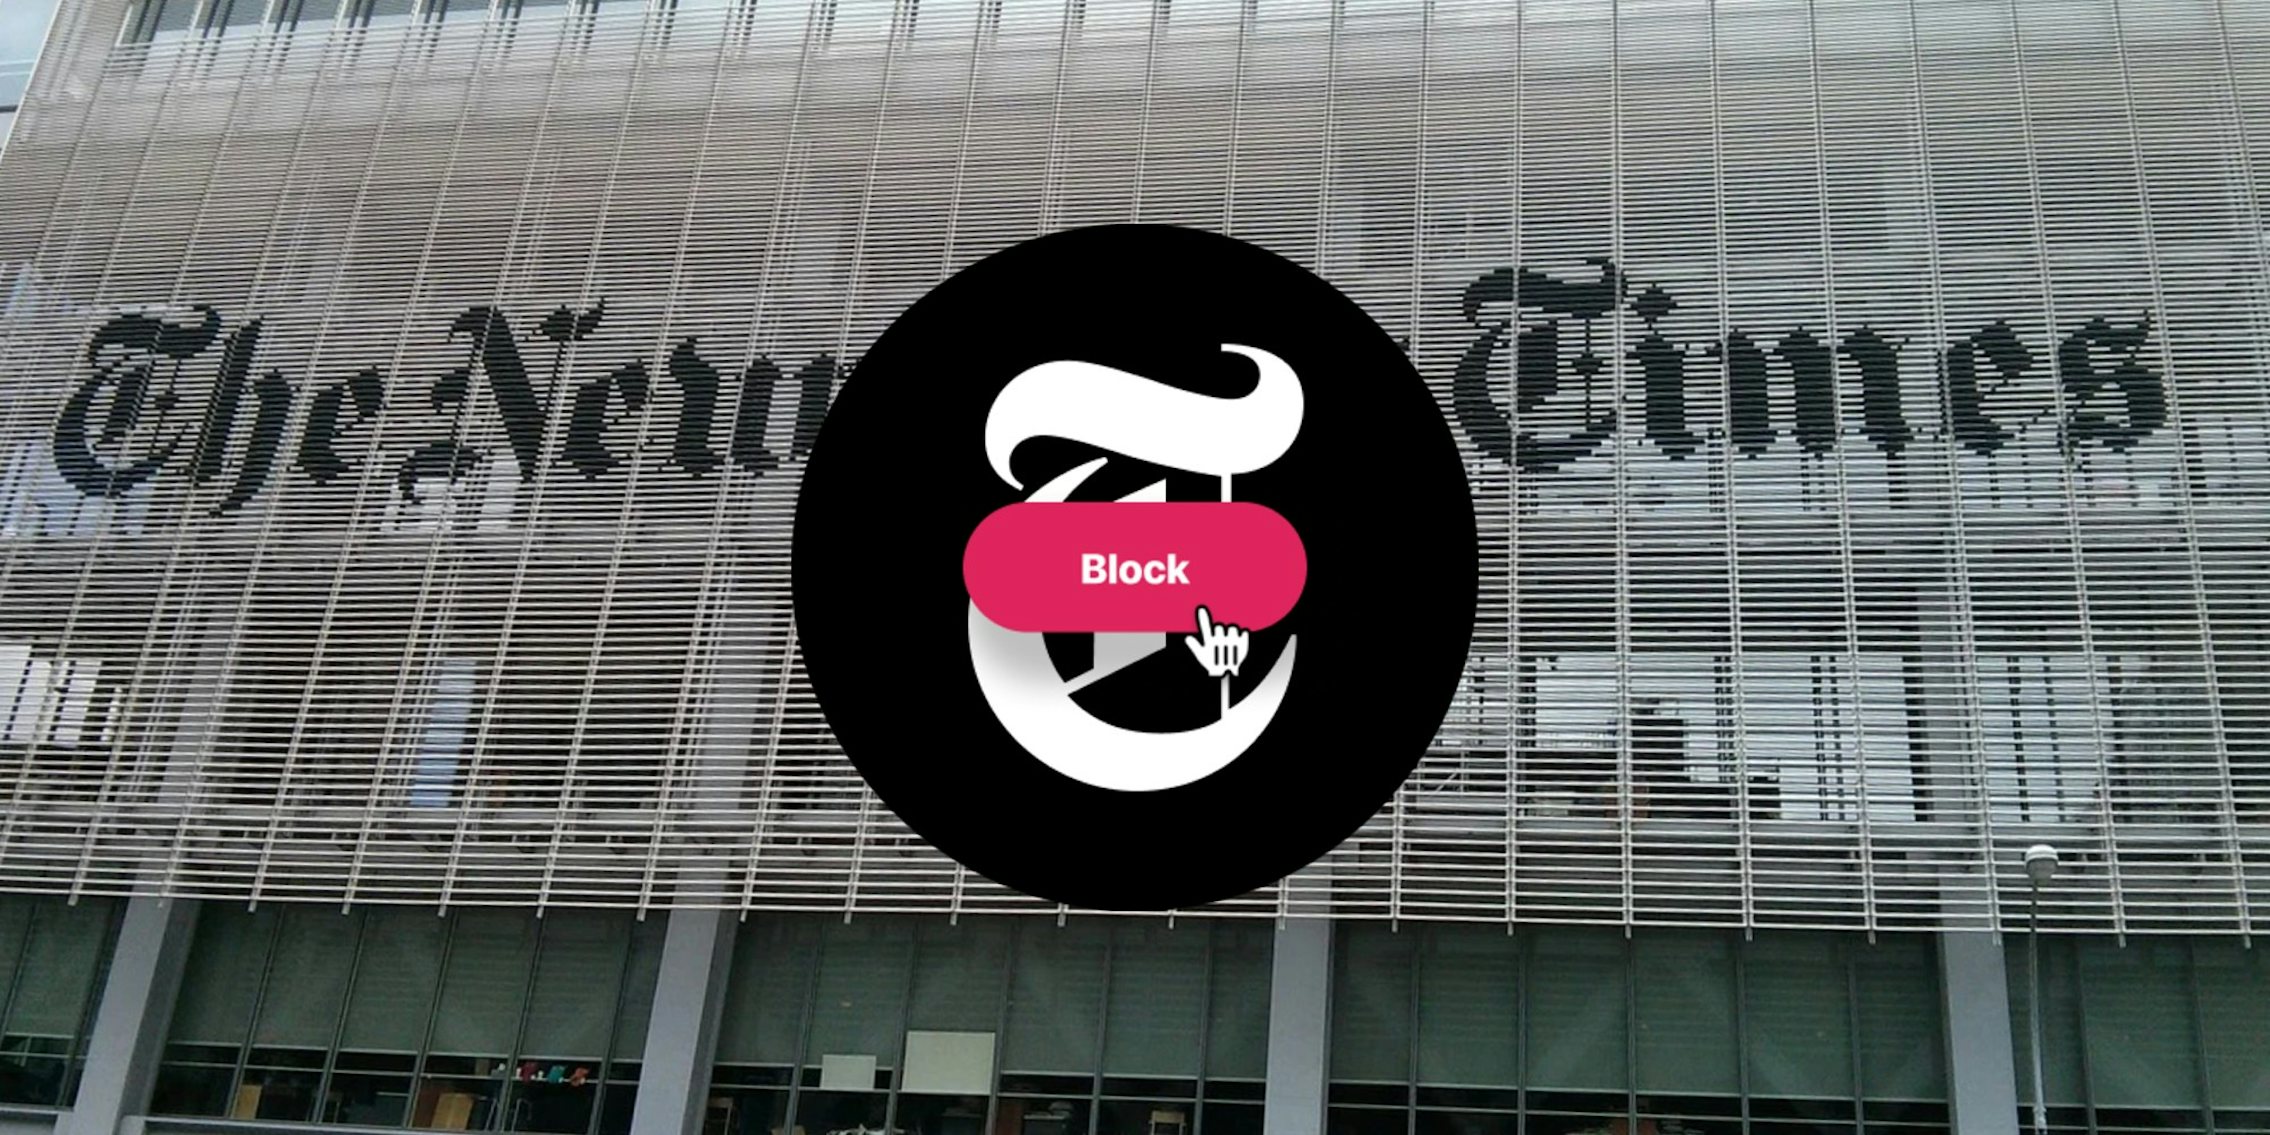 Block The New York times